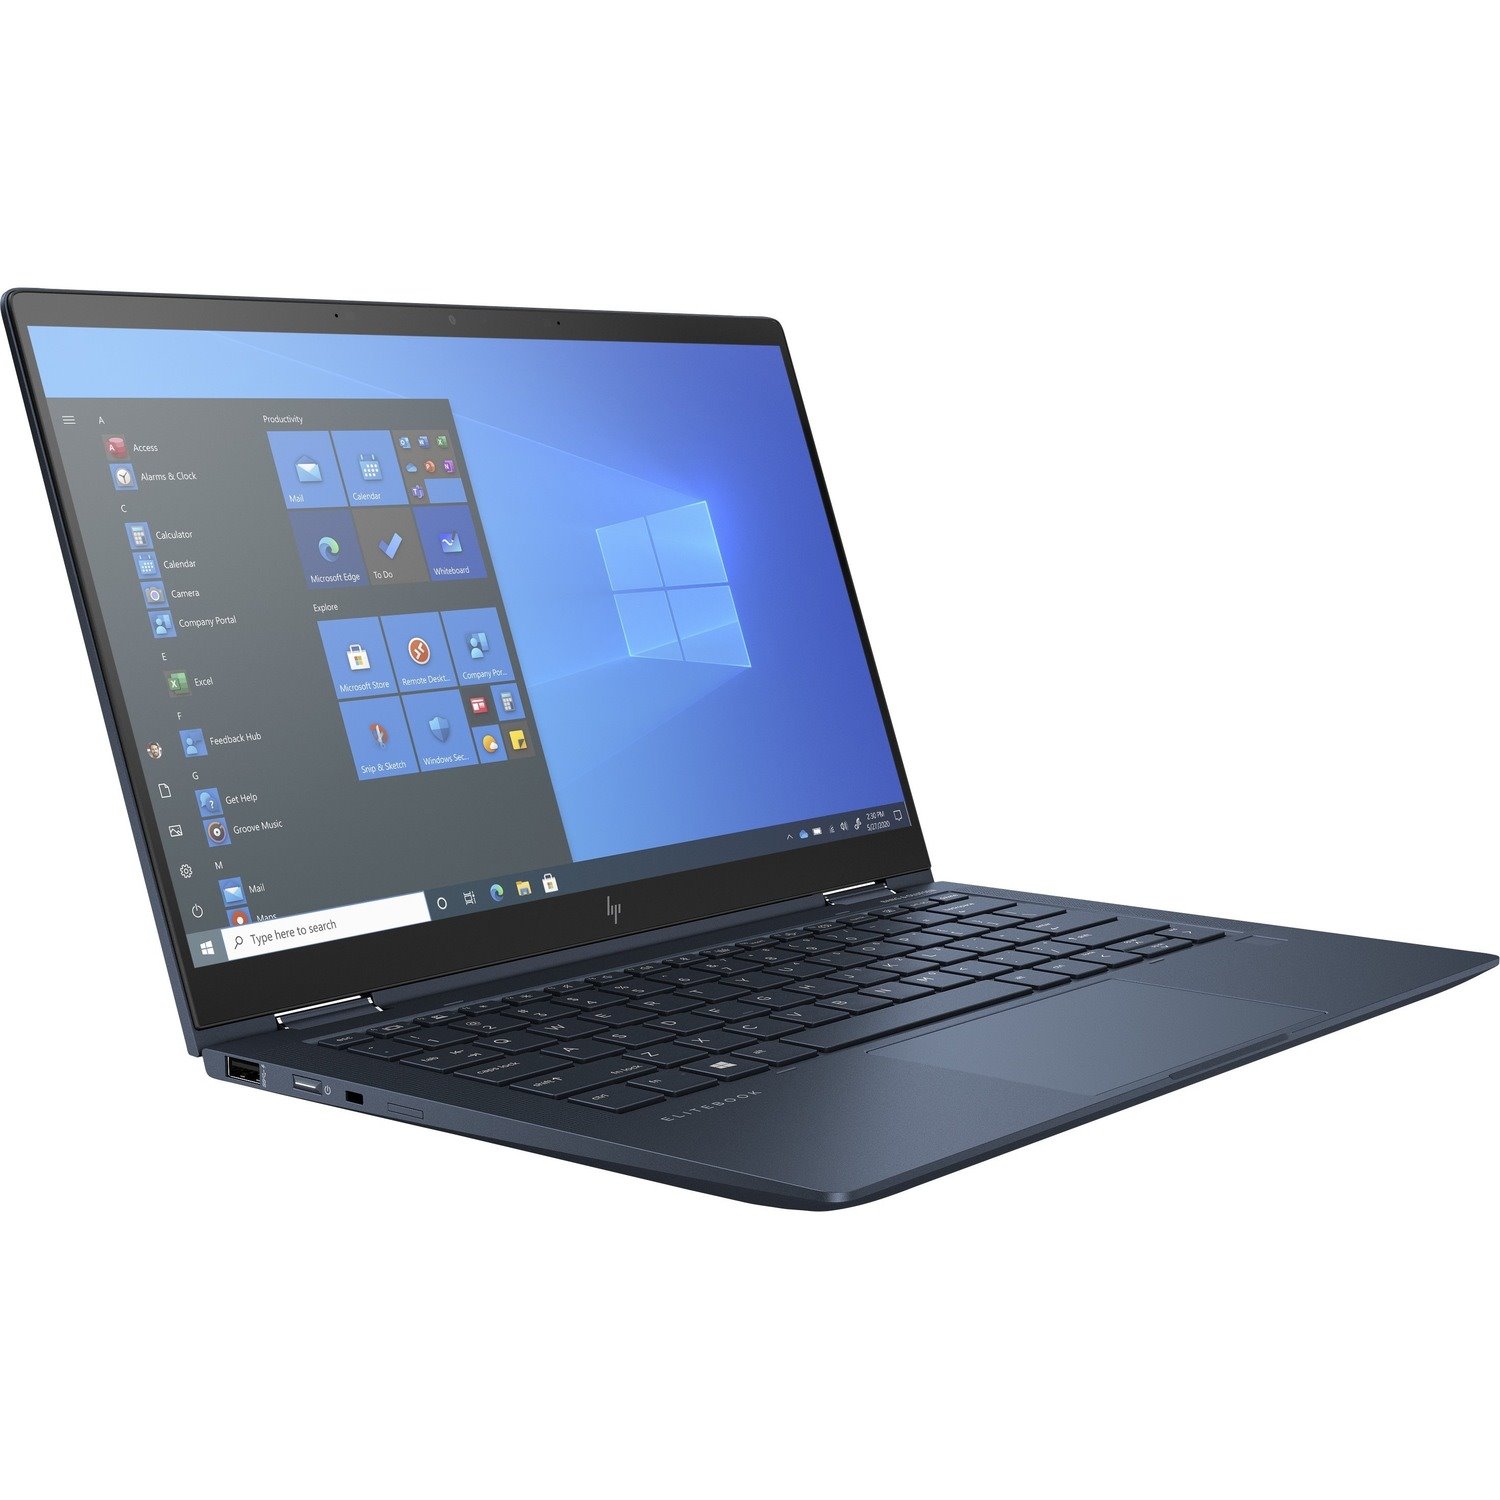 HP Elite Dragonfly G2 33.8 cm (13.3") Touchscreen Convertible 2 in 1 Notebook - Full HD - 1920 x 1080 - Intel Core i7 11th Gen i7-1185G7 Quad-core (4 Core) 3 GHz - 16 GB Total RAM - 512 GB SSD